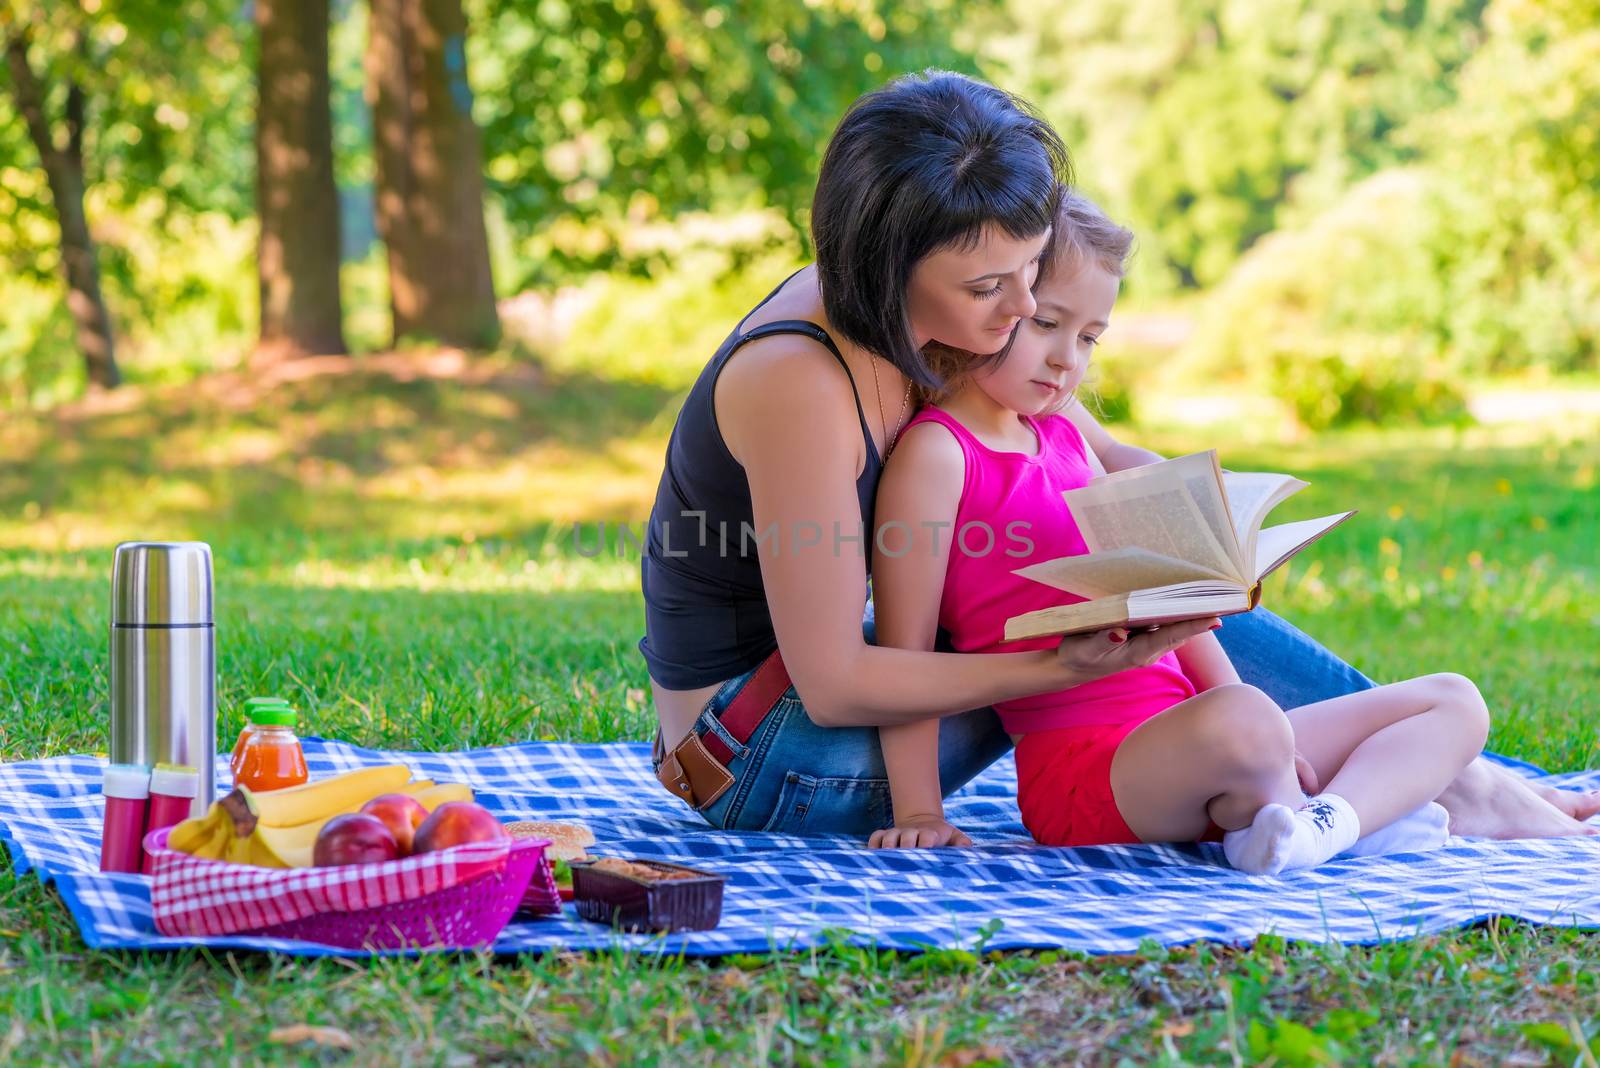 Mom and daughter reading a book on the lawn in the park